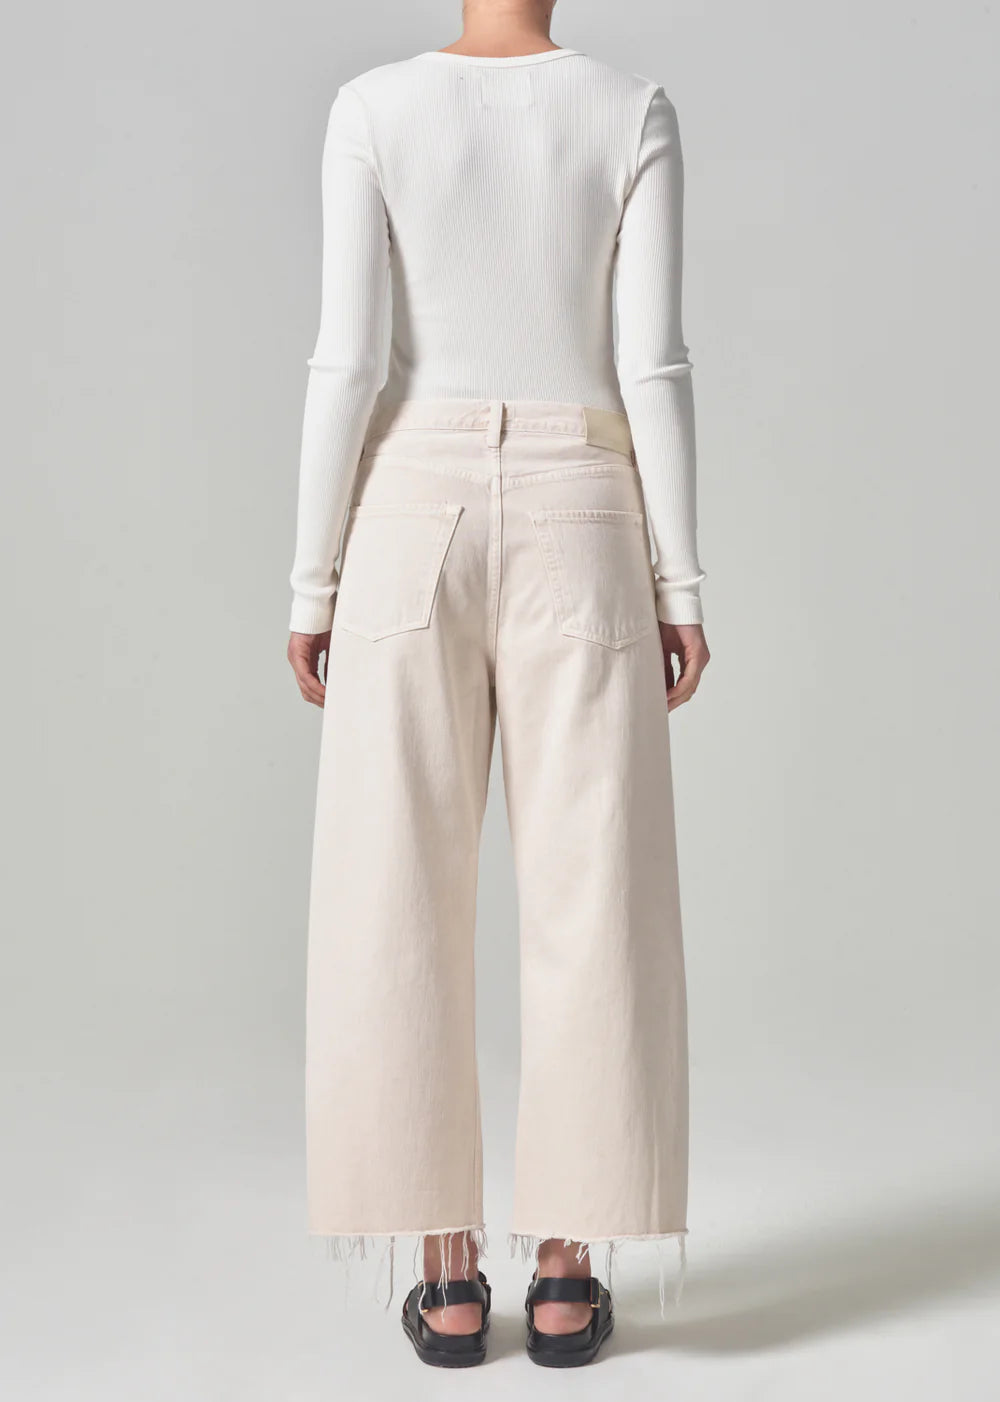 Citizens of Humanity Ayla Raw Hem Crop in Almond